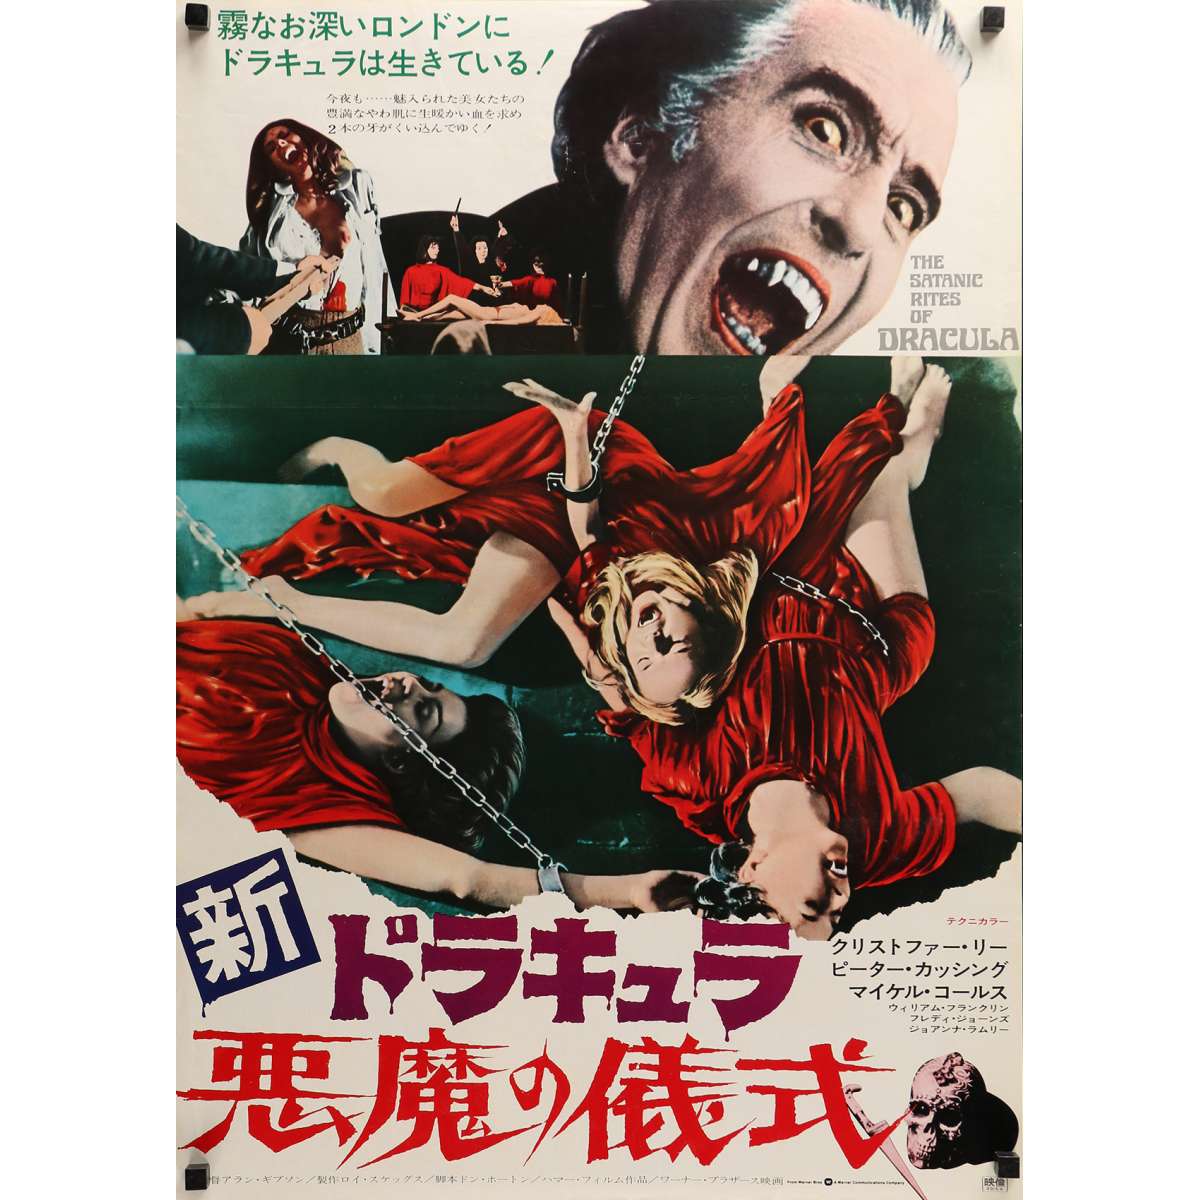 THE SATANIC RITES OF DRACULA Movie Poster 20x28 in.